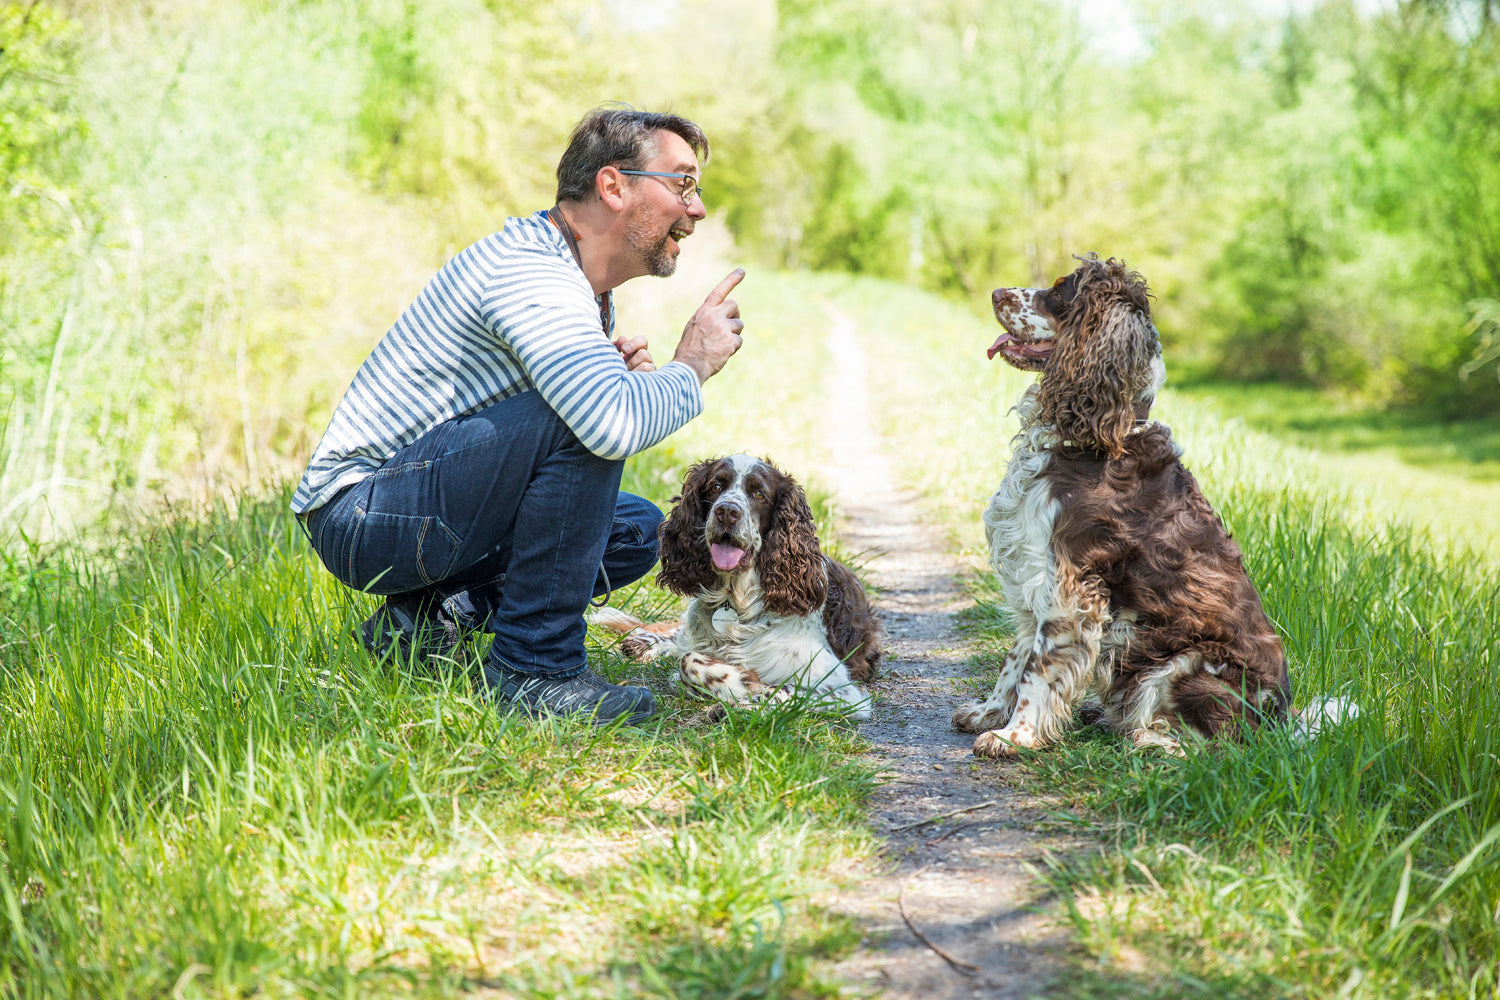 Fetch Success: How to Turn Your Dog Training Sessions into Tail-Wagging Fun!